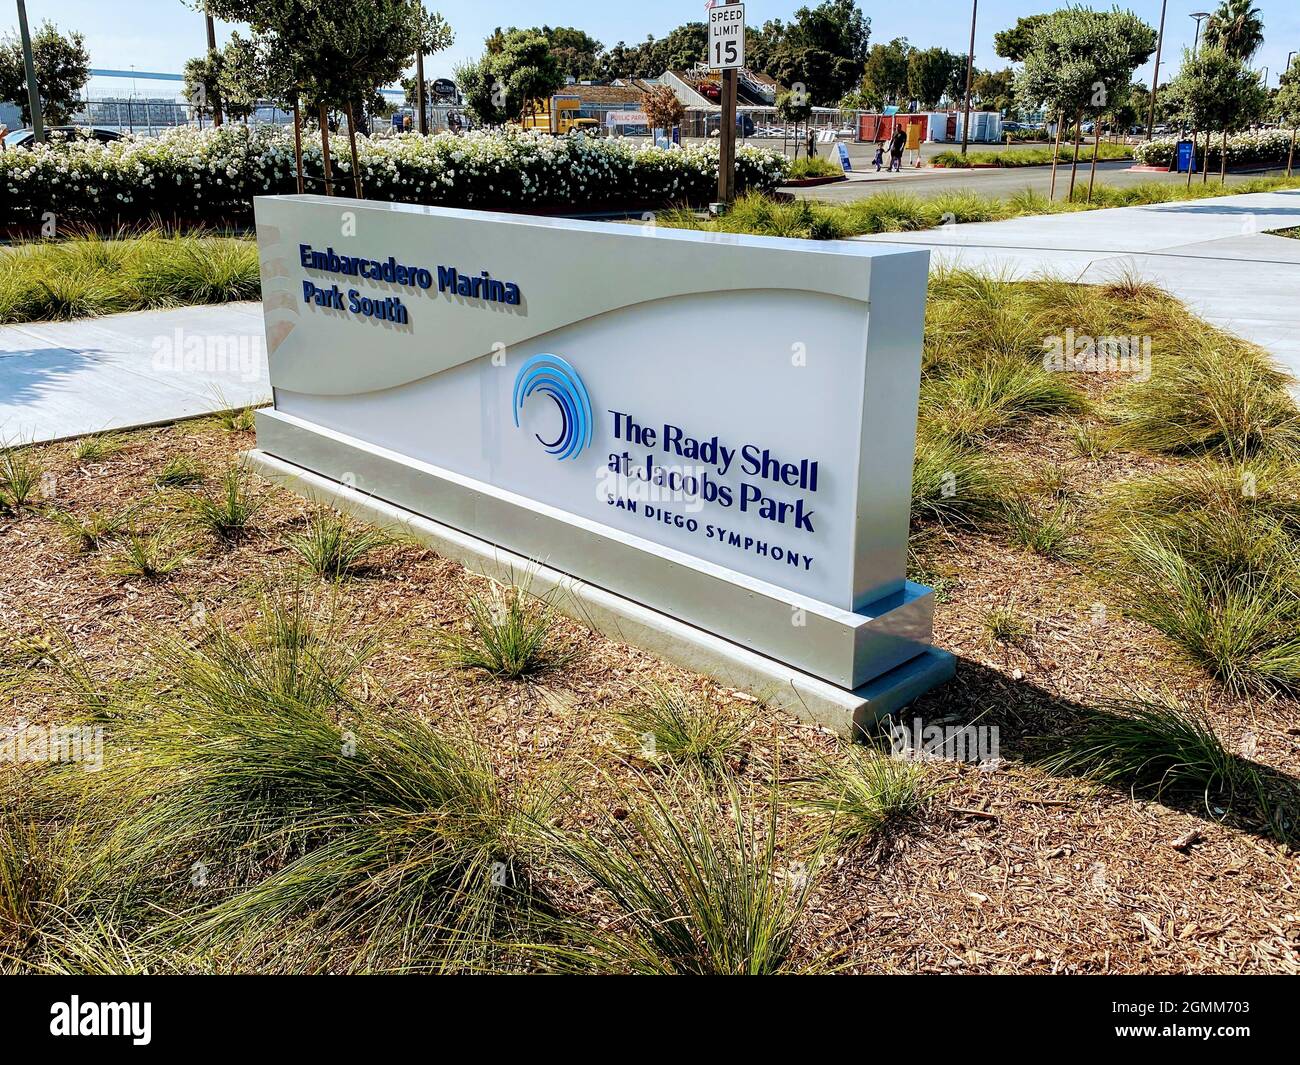 SAN DIEGO, CA 9-19-2021: Entrance sign to the Rady Shell concert venue at  Jacobs Park in the Embarcadero Marina Stock Photo - Alamy